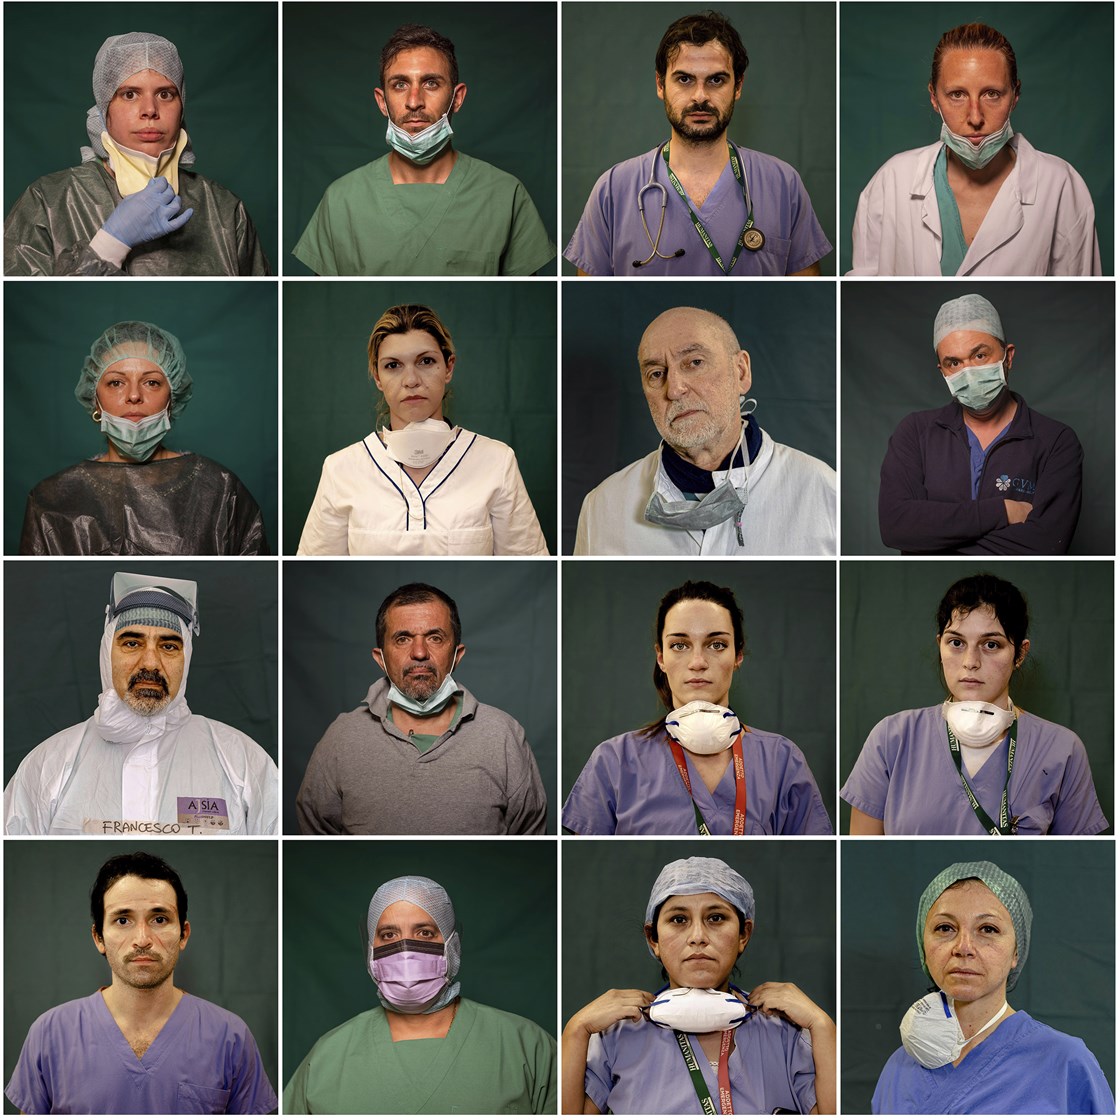 ortraits of Italian doctors and nurses taken during a break or at the end of their shifts in Rome, Bergamo and Brescia. Photo by Domenico Stinellis, Antonio Calanni, Luca Bruno / AP